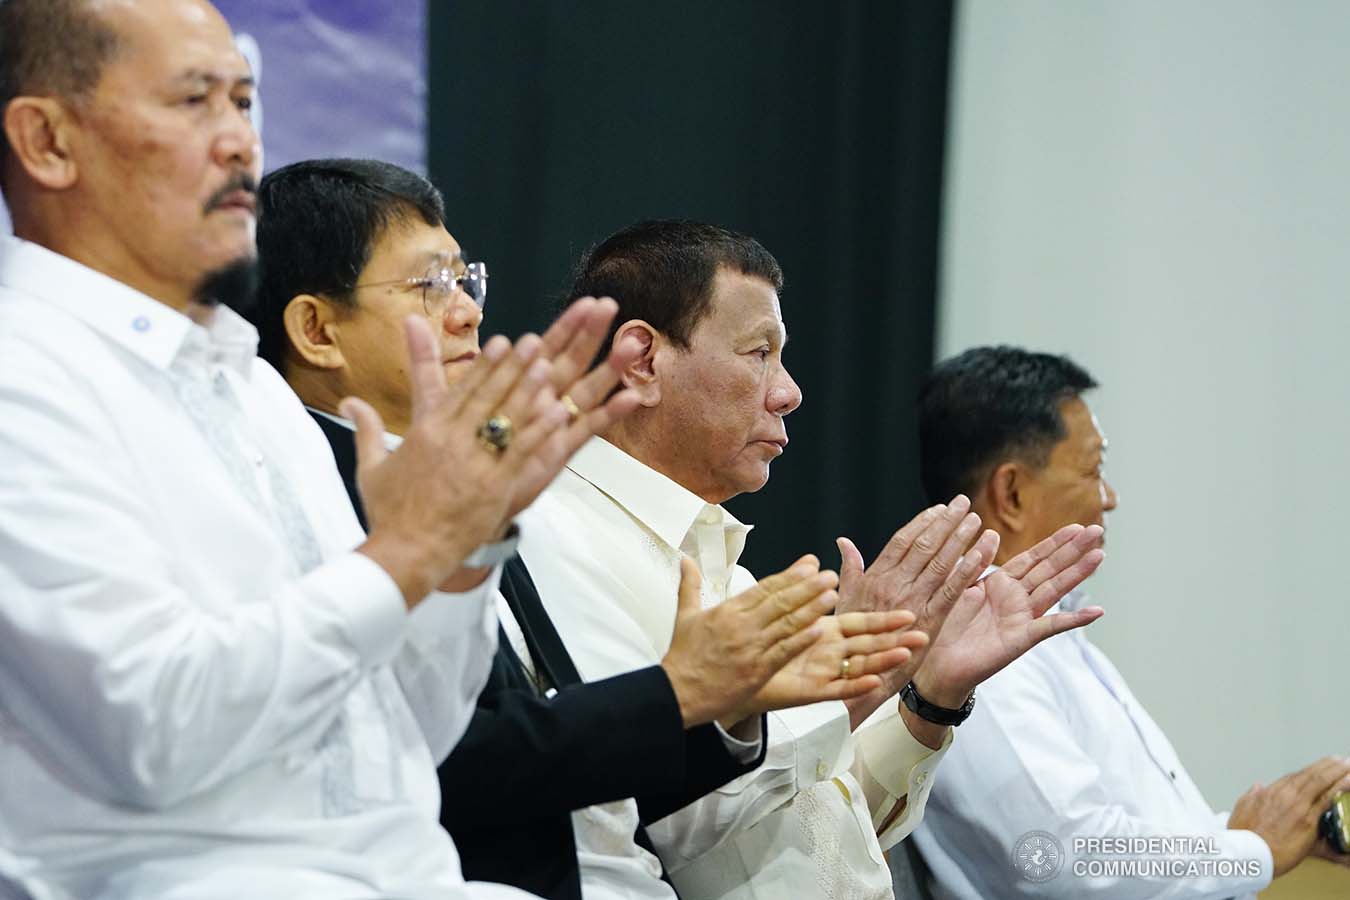 President Rodrigo Roa Duterte applauds while witnessing the program proper during the joint graduation ceremony of Public Safety Officers Basic Course Class 2019-07 and Advance Course Class 2019-18 at the Arcadia Active Lifestyle Center in Davao City on February 20, 2020. JOEY DALUMPINES/PRESIDENTIAL PHOTO